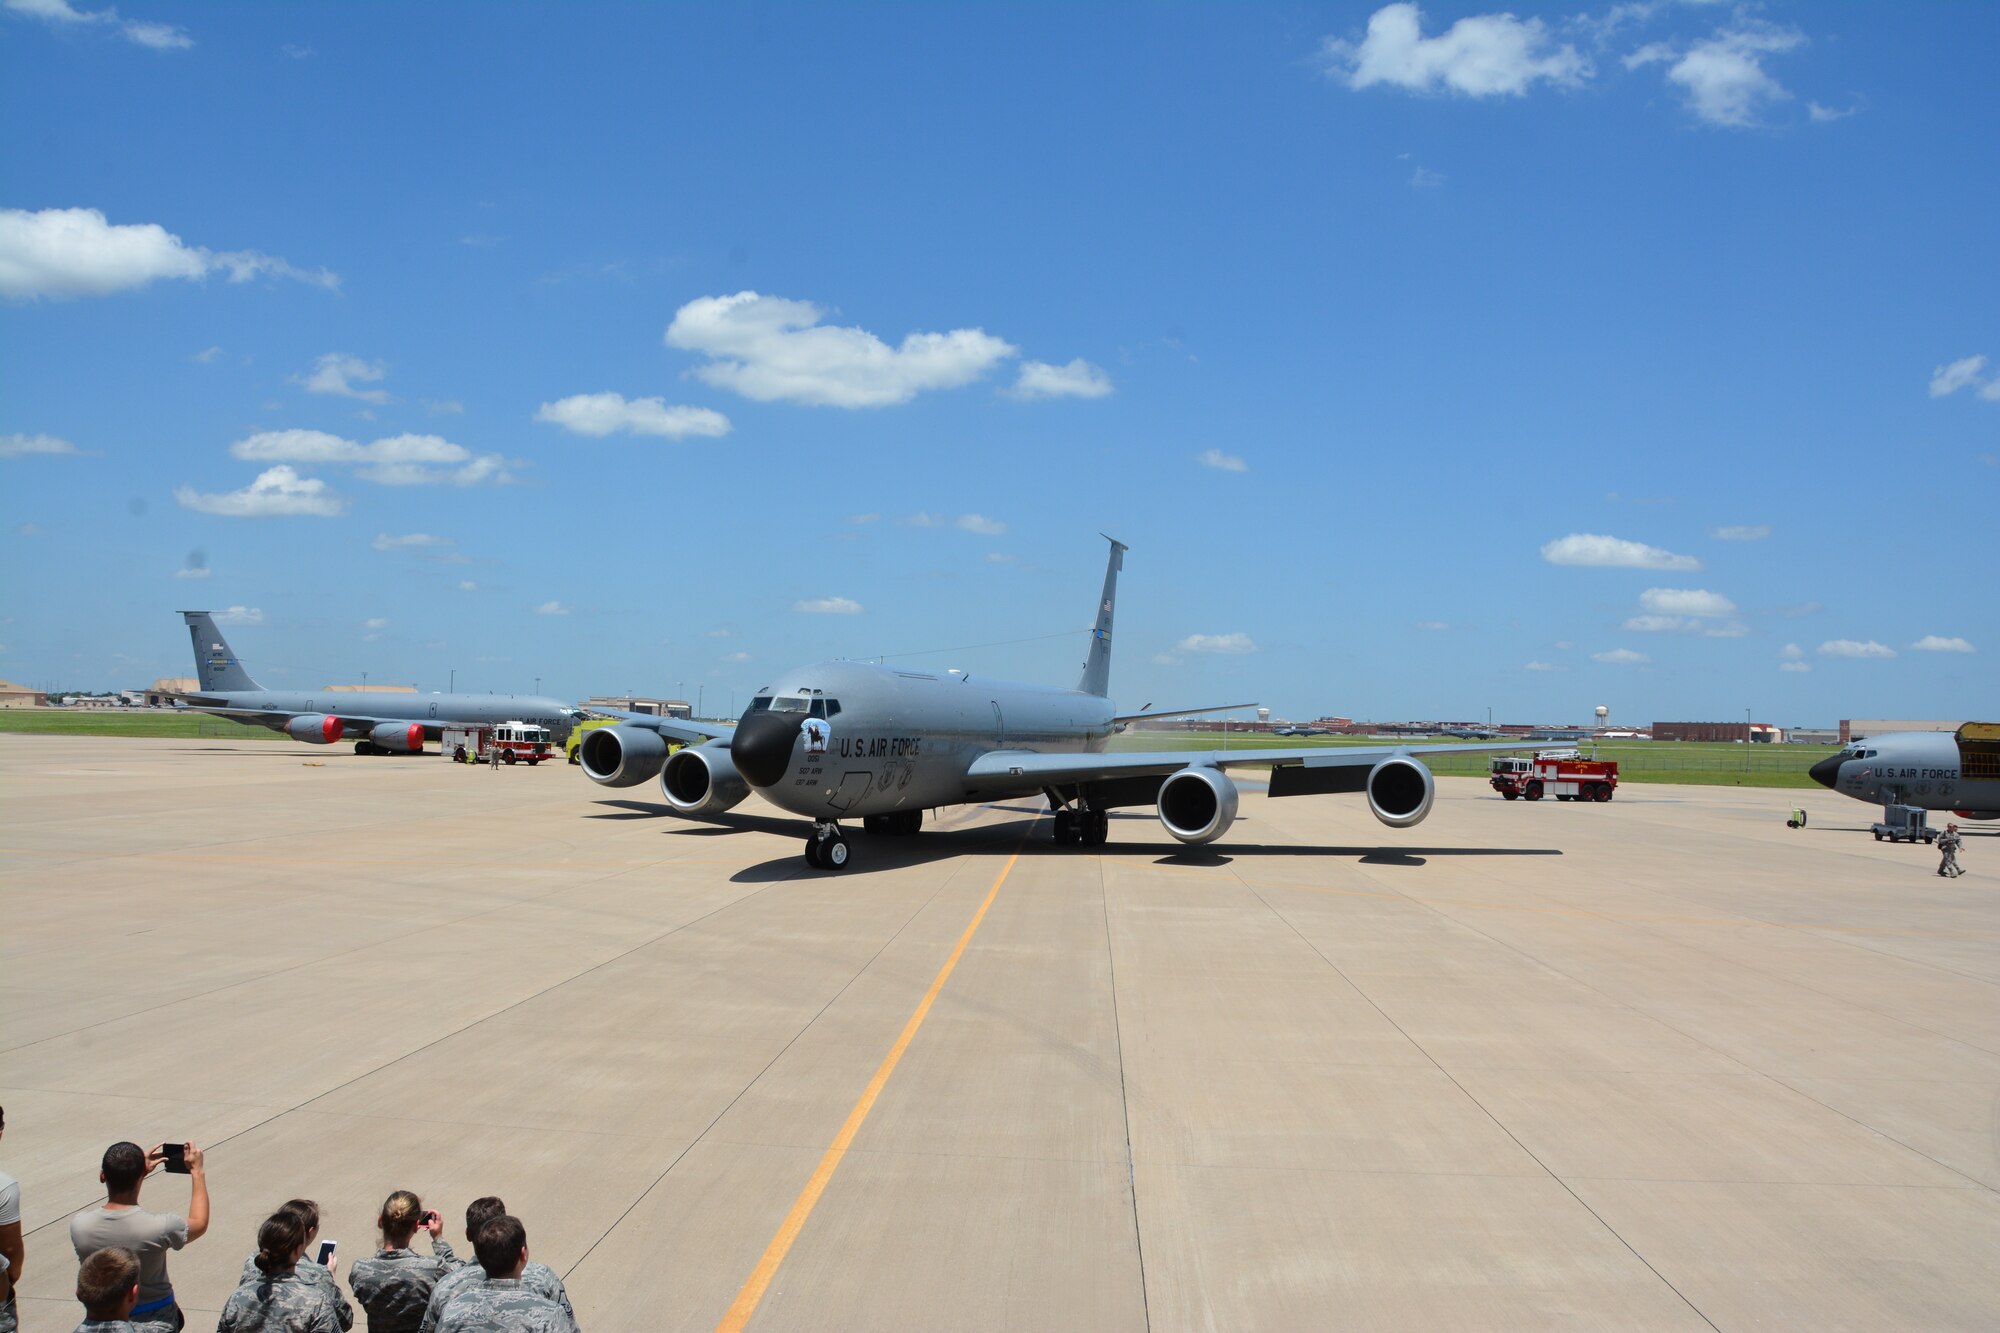 A 137th Air Refueling Wing aircrew taxis in a Reserve KC-135R as they completed the last day flight of the association, June 24, 2015 at Tinker Air Force Base. This final fight marks an end to the formal Air Reserve Component Association between the 507th Air Refueling Wing and the 137th ARW (U.S. Air Force Photo/Maj. Jon Quinlan).